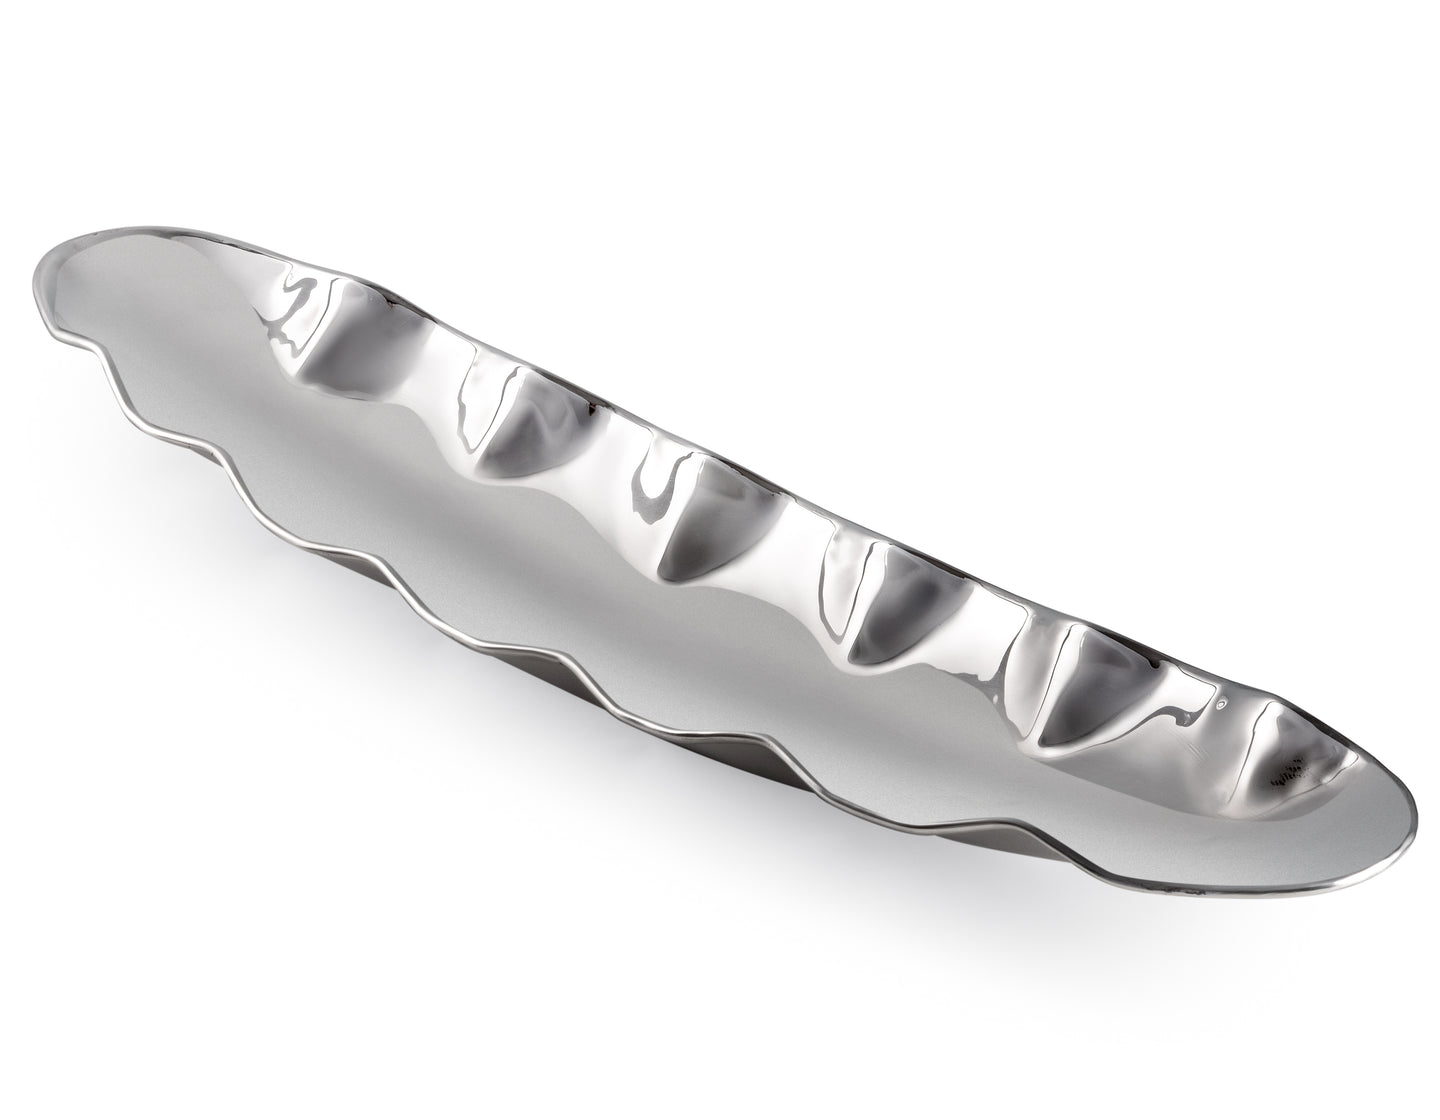 Stainless Steel Boat Dish With Wavy Edge - 19.25